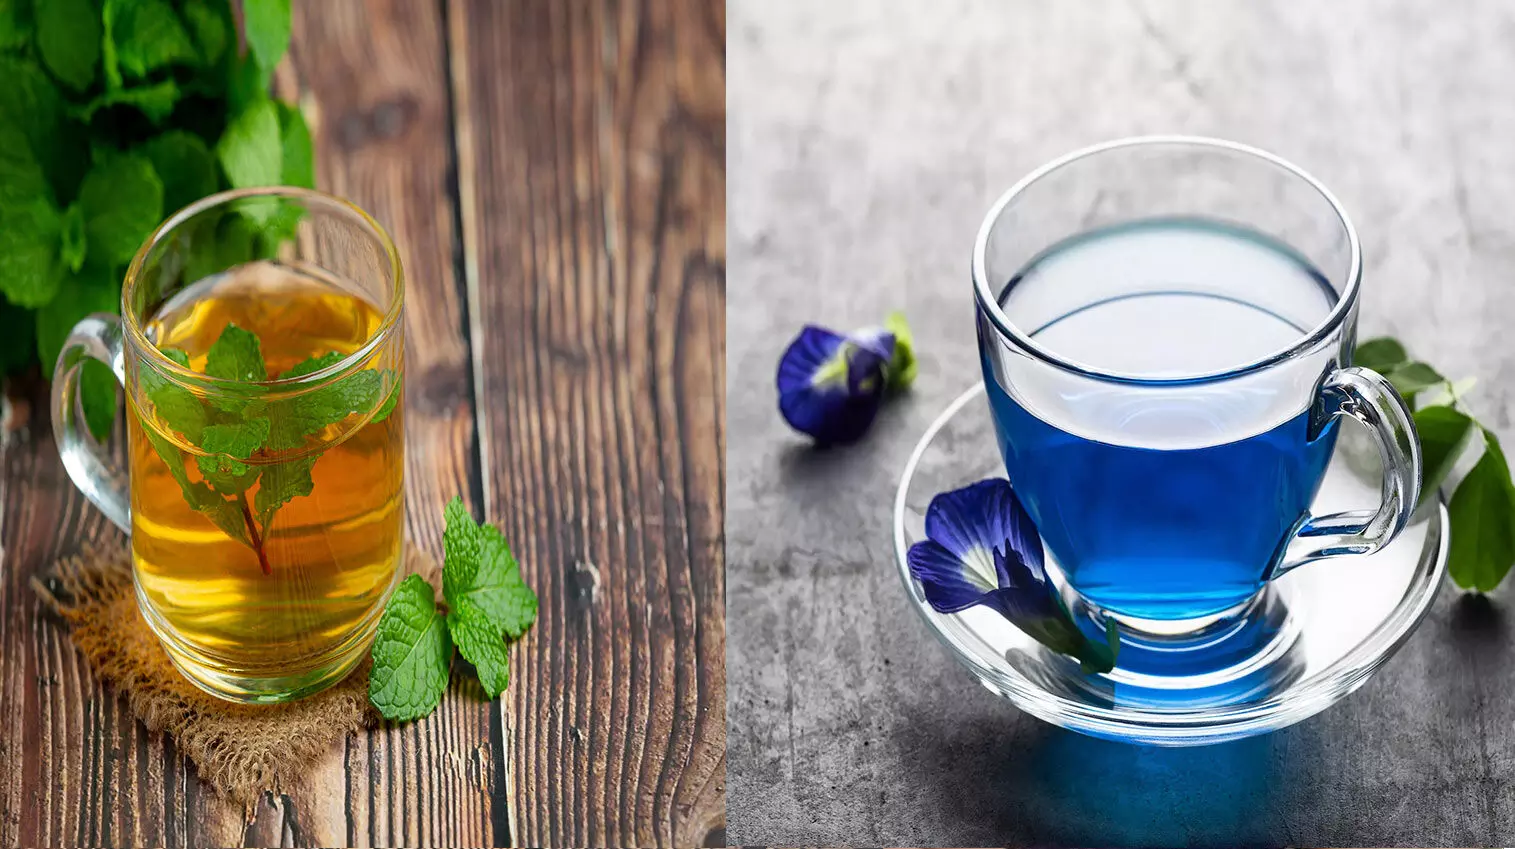 Which Tea Helps You Lose Weight: Green Tea or Butterfly Pea Tea?